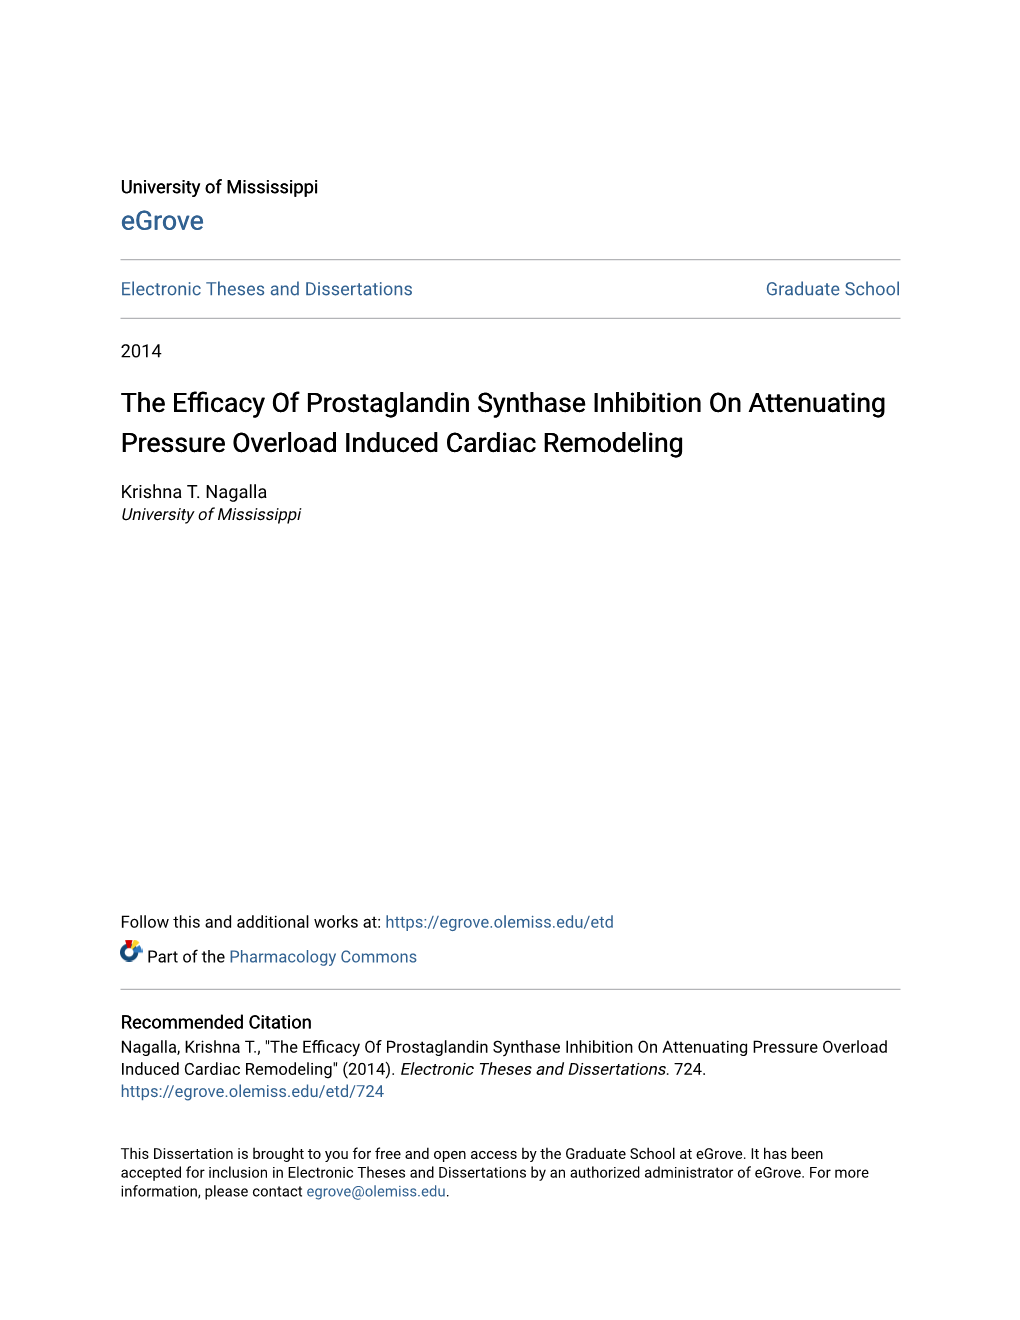 The Efficacy of Prostaglandin Synthase Inhibition on Attenuating Pressure Overload Induced Cardiac Remodeling" (2014)